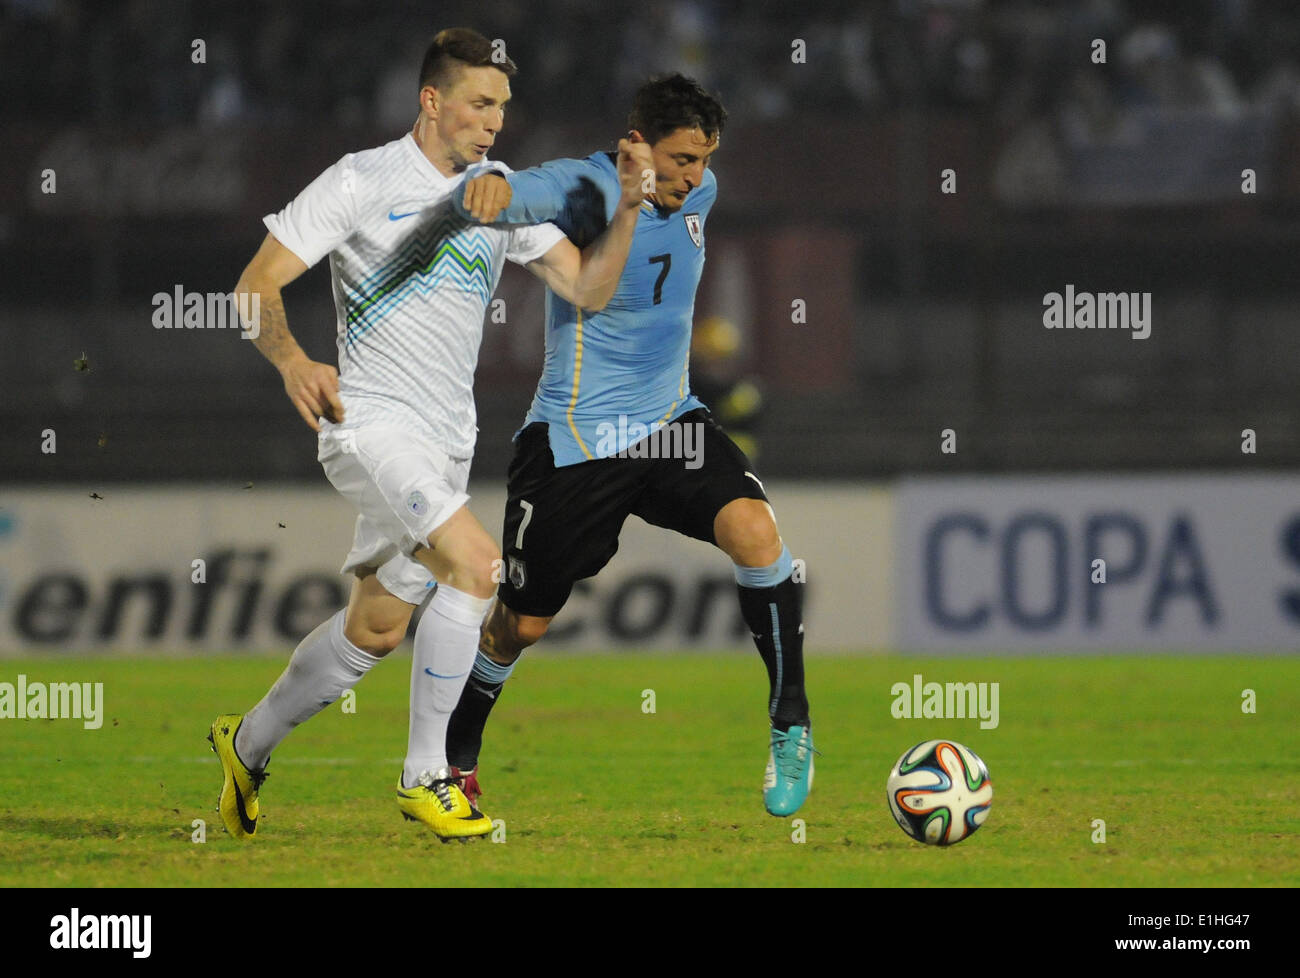 Montevideo, Uruguay. 4th June, 2014. Uruguay's Cristian Rodriguez vies for the ball with Slovenia's Rajko Rotman (L) during a friendly match prior to the 2014 FIFA World Cup, held at the Centenario Stadium, in Montevideo, capital of Uruguay, on June 4, 2014. © Nicolas Celaya/Xinhua/Alamy Live News Stock Photo